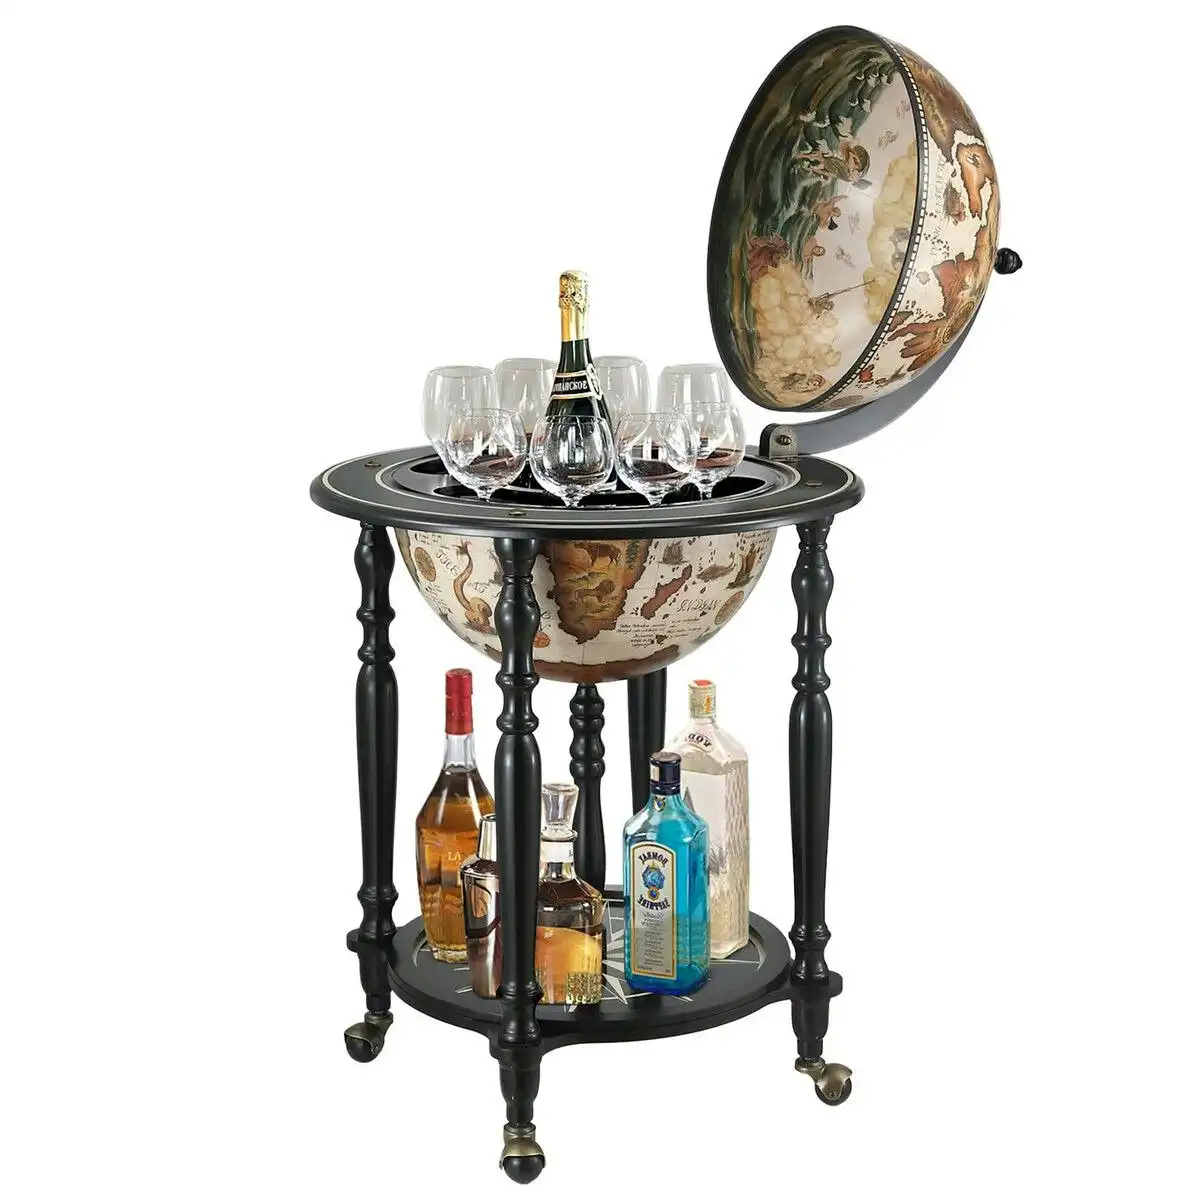 Ausway Antique Globe Alcohol Cabinet Round Mini Bar Drinks Serving Trolley Cart Wine Rack Mid-century